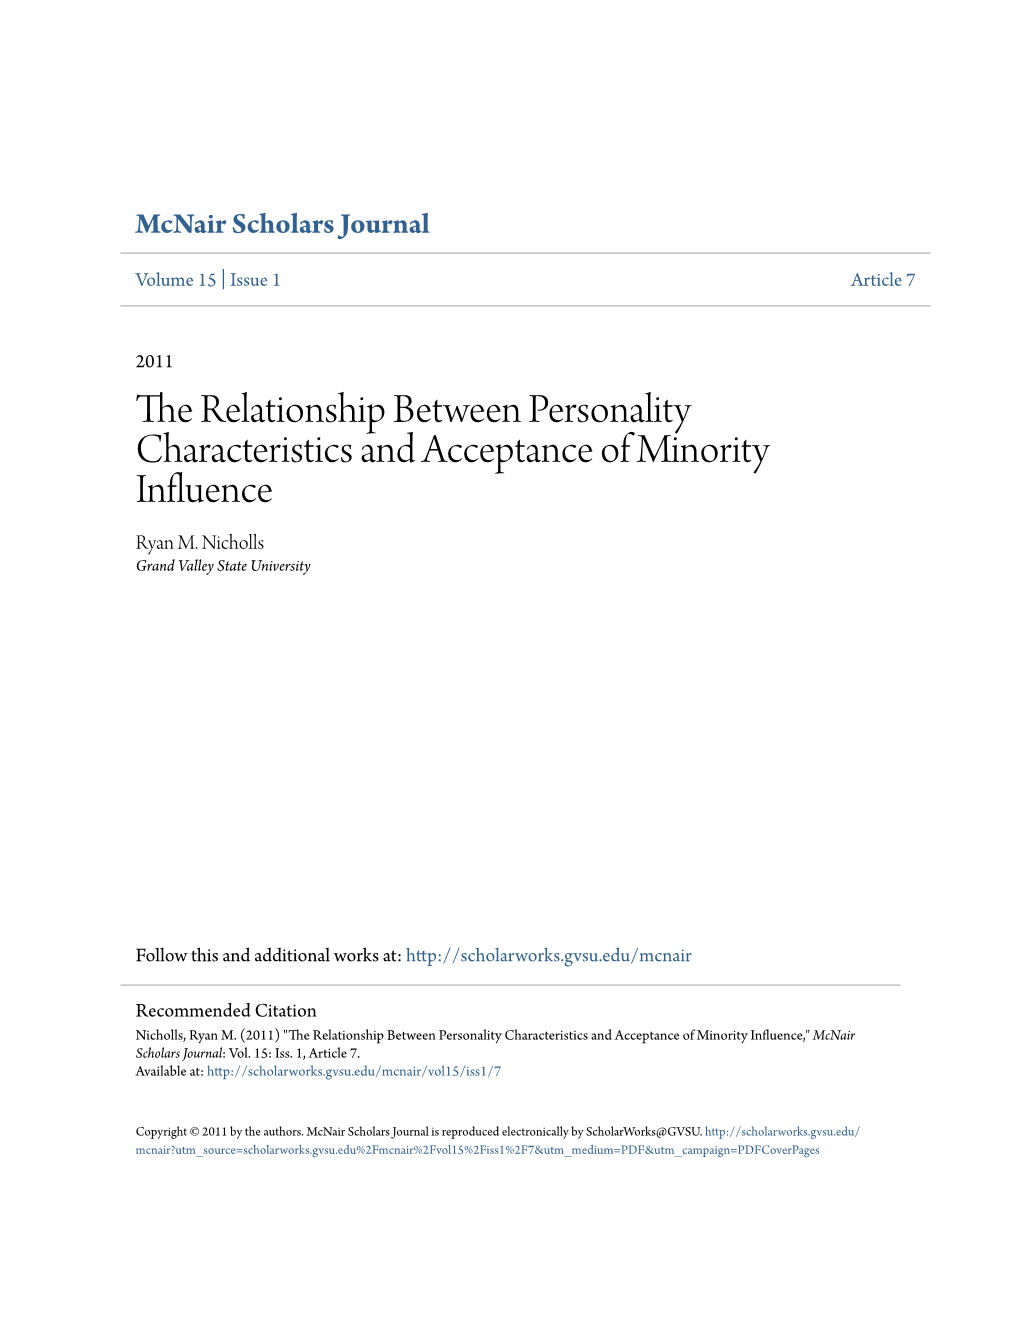 The Relationship Between Personality Characteristics and Acceptance of Minority Influence Ryan M